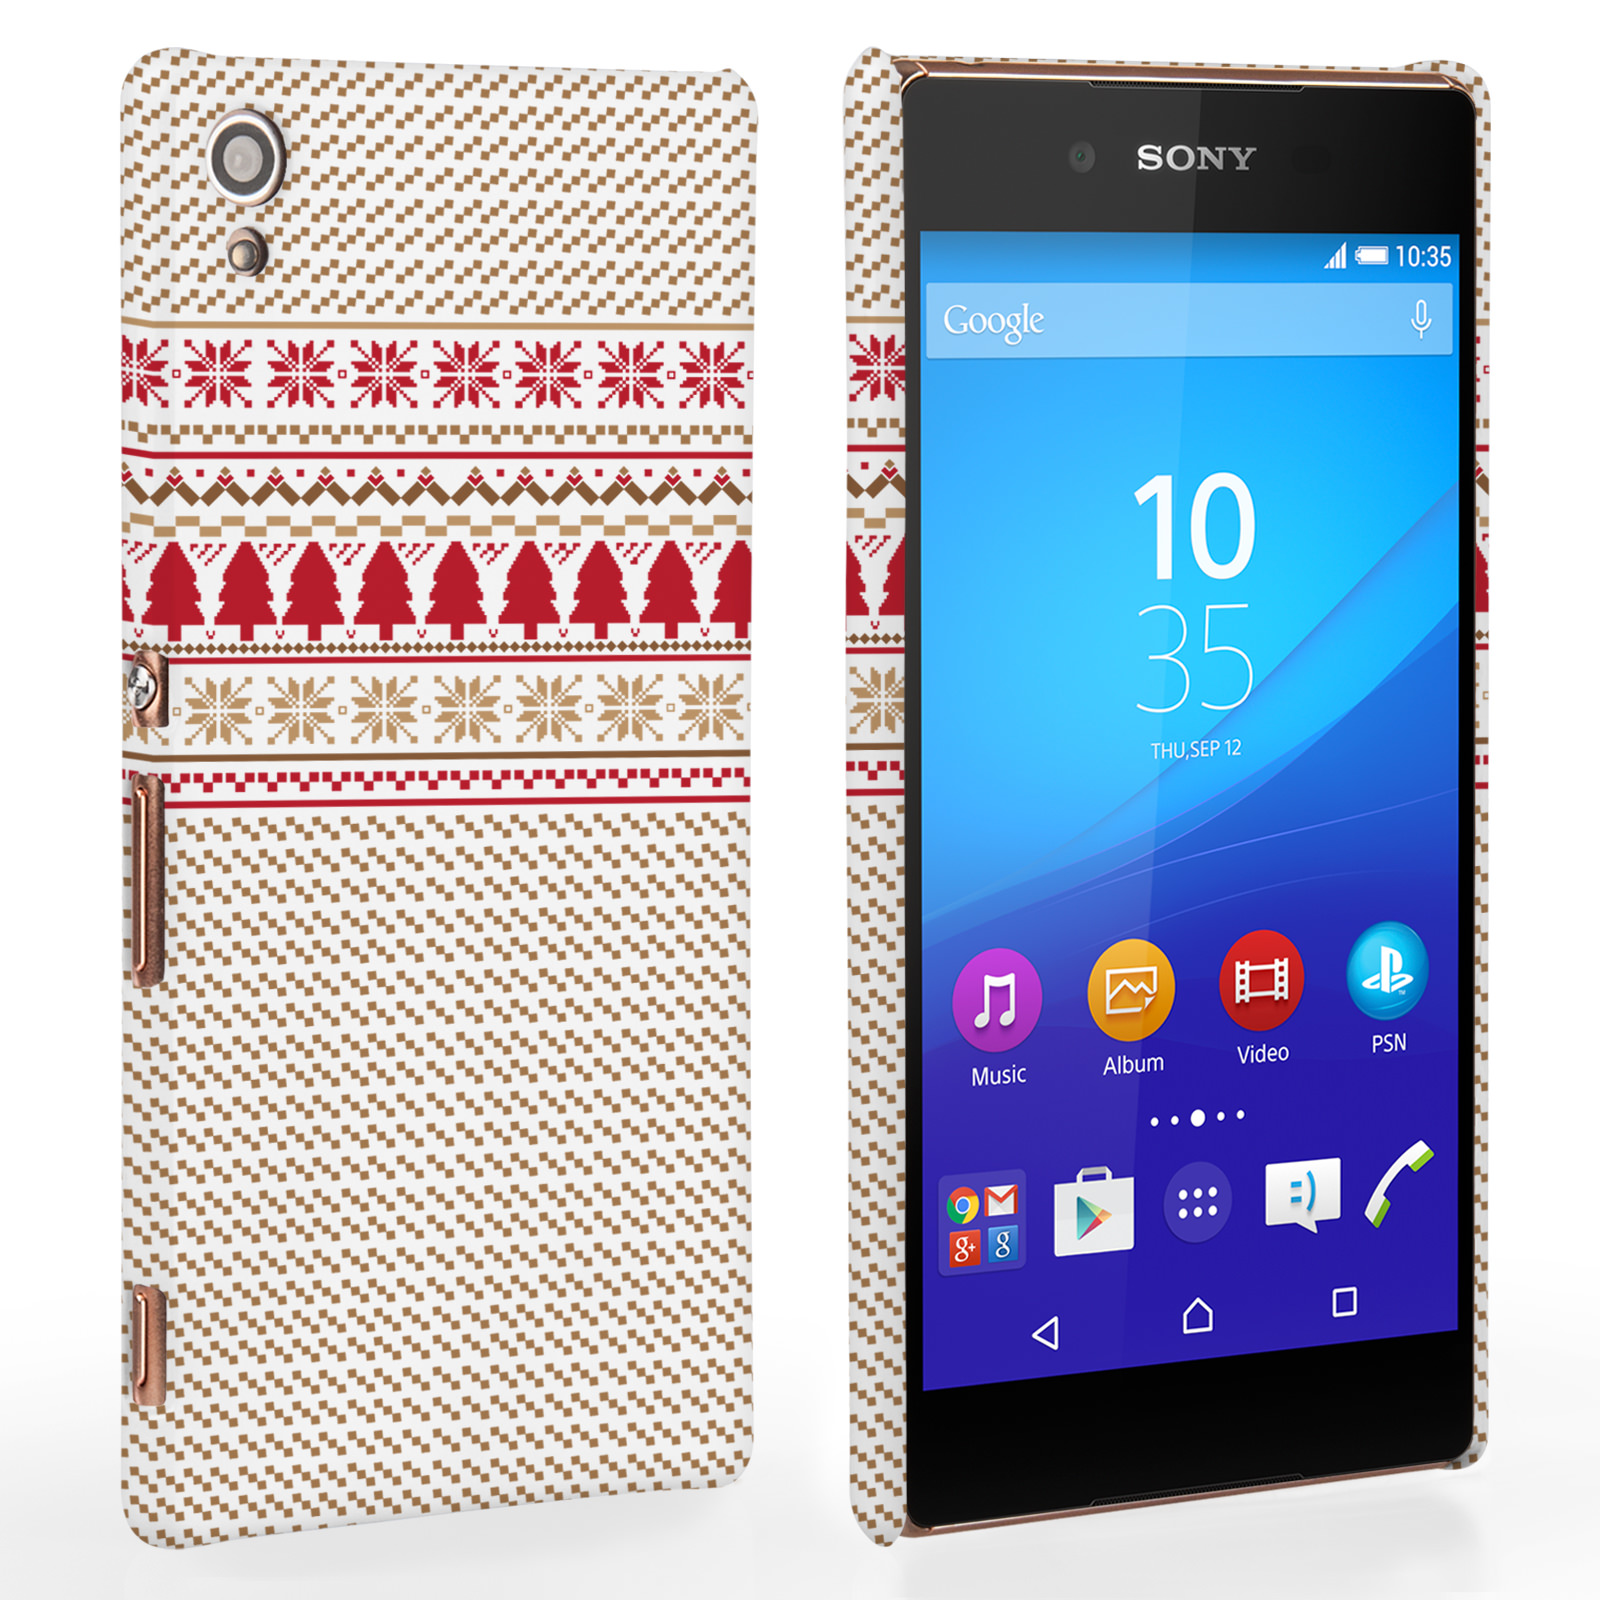 Caseflex Sony Xperia Z3+ Christmas Knitted Snowflake Jumper Hard Case - Brown / Red / White